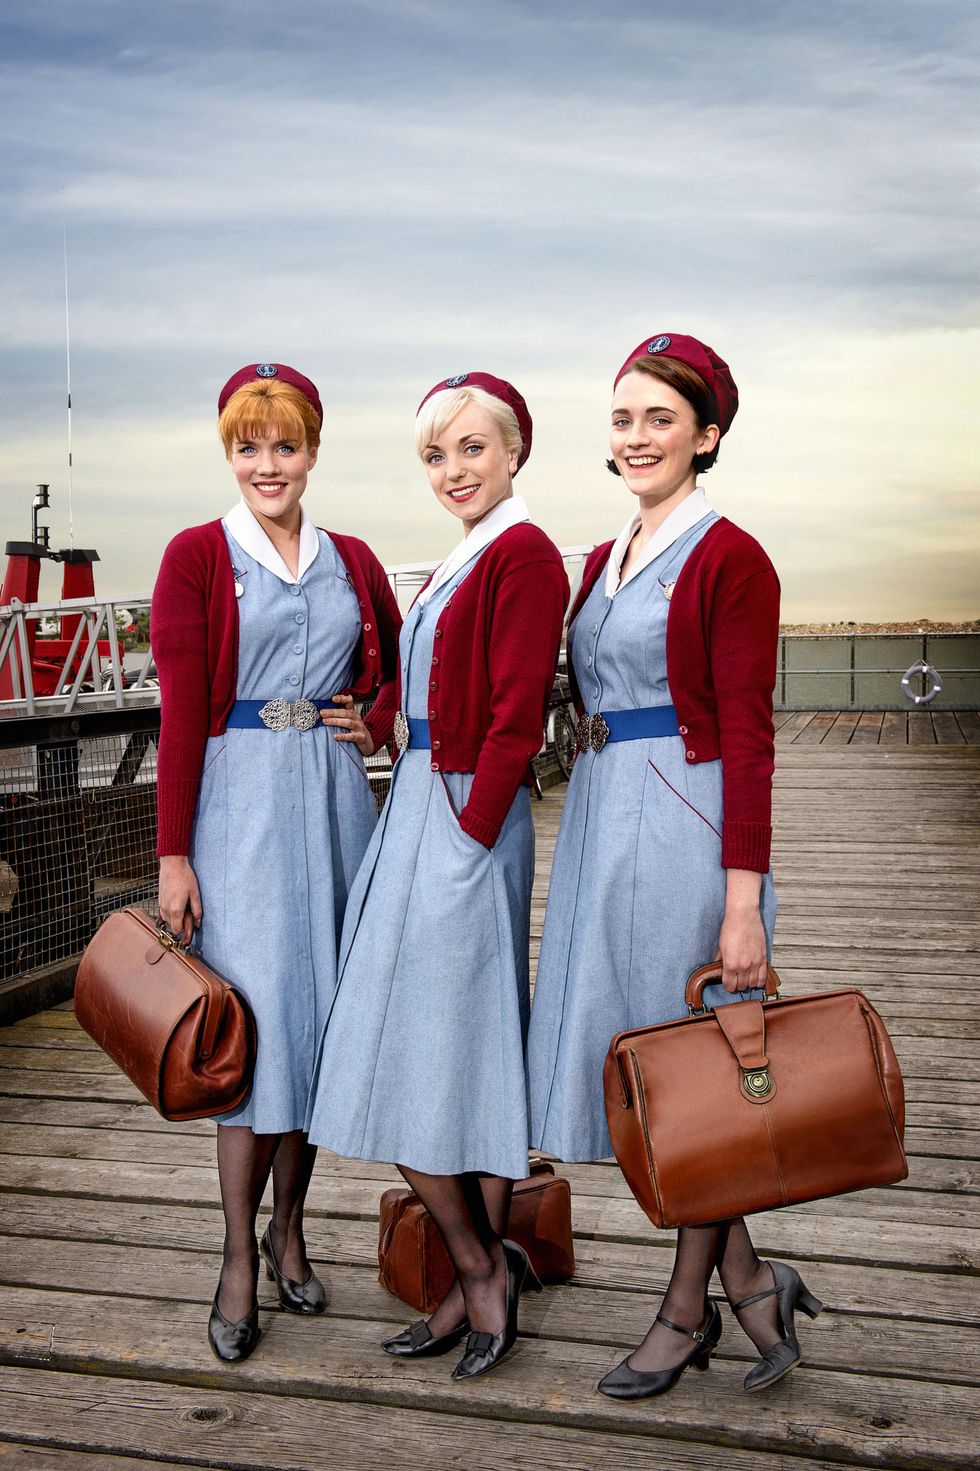 Emerald Fennell as Nurse Patsy Mount, Helen George as Nurse Trixie Franklin, Charlotte Ritchie as Nurse Barbara Gilbert in Call the Midwife series 5